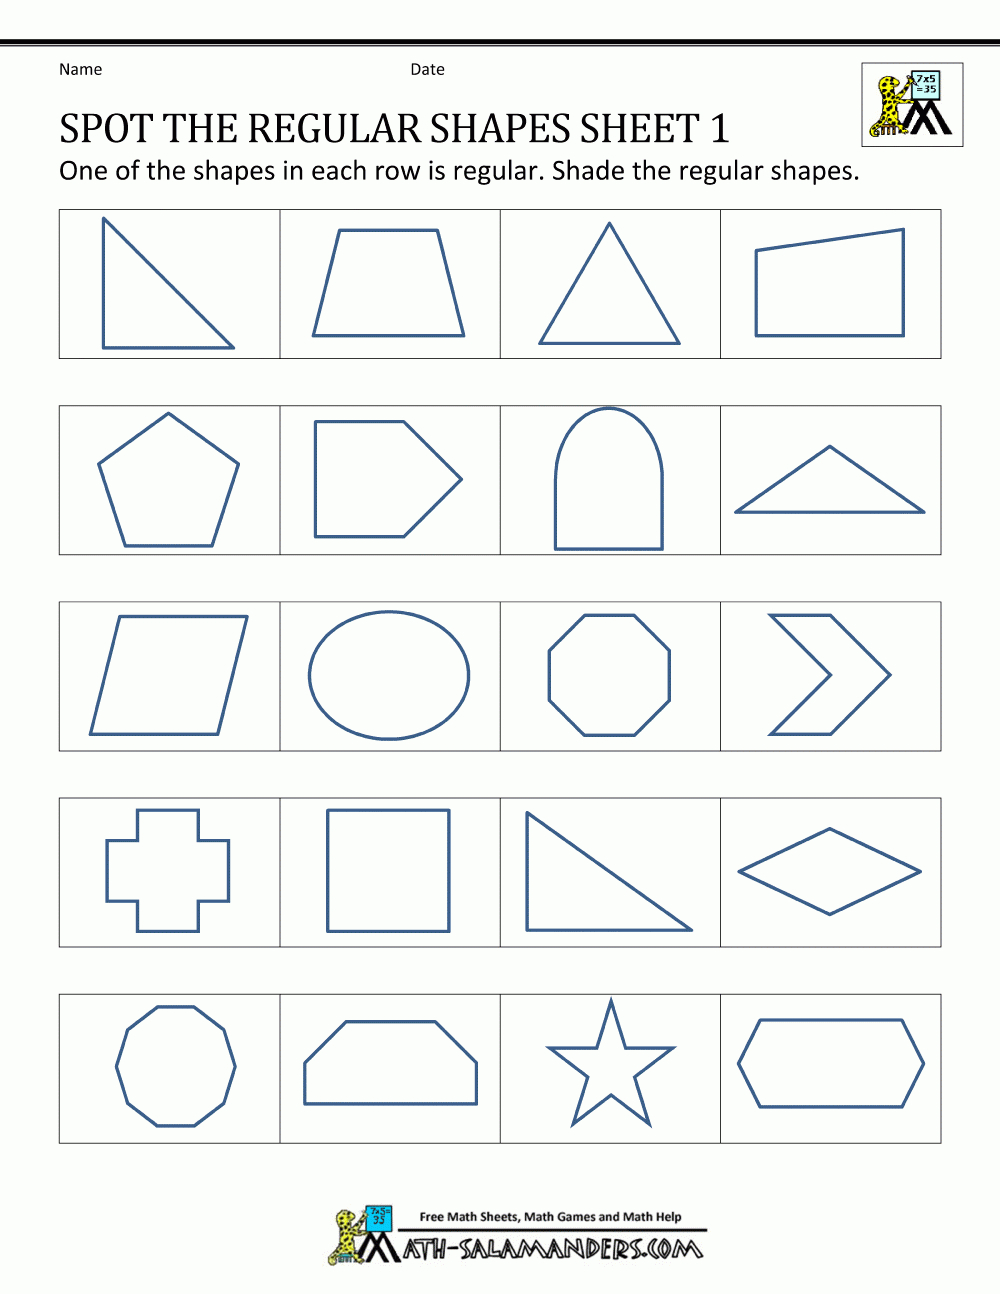 Regular Shapes Together With Angles In Polygons Worksheet Answers